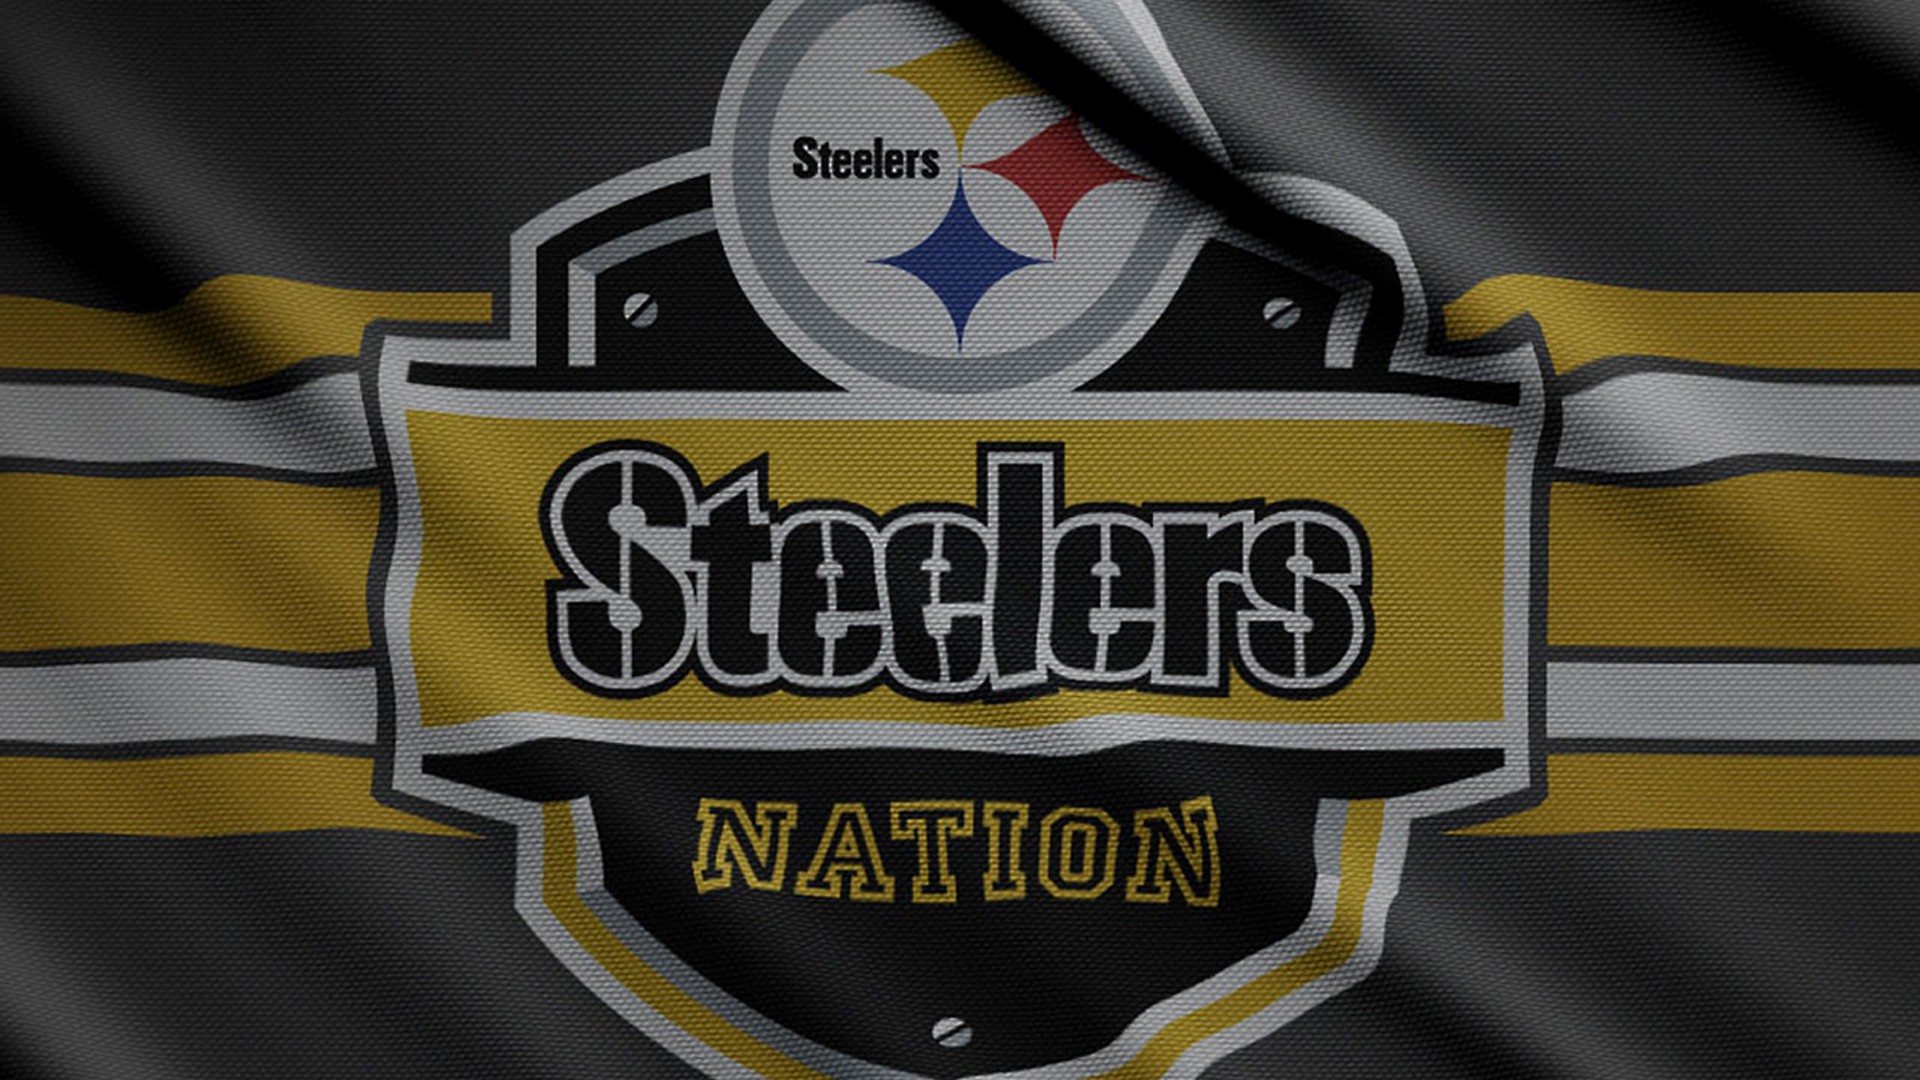 HD Steelers Logo Backgrounds with resolution 1920x1080 pixel. You can make this wallpaper for your Mac or Windows Desktop Background, iPhone, Android or Tablet and another Smartphone device